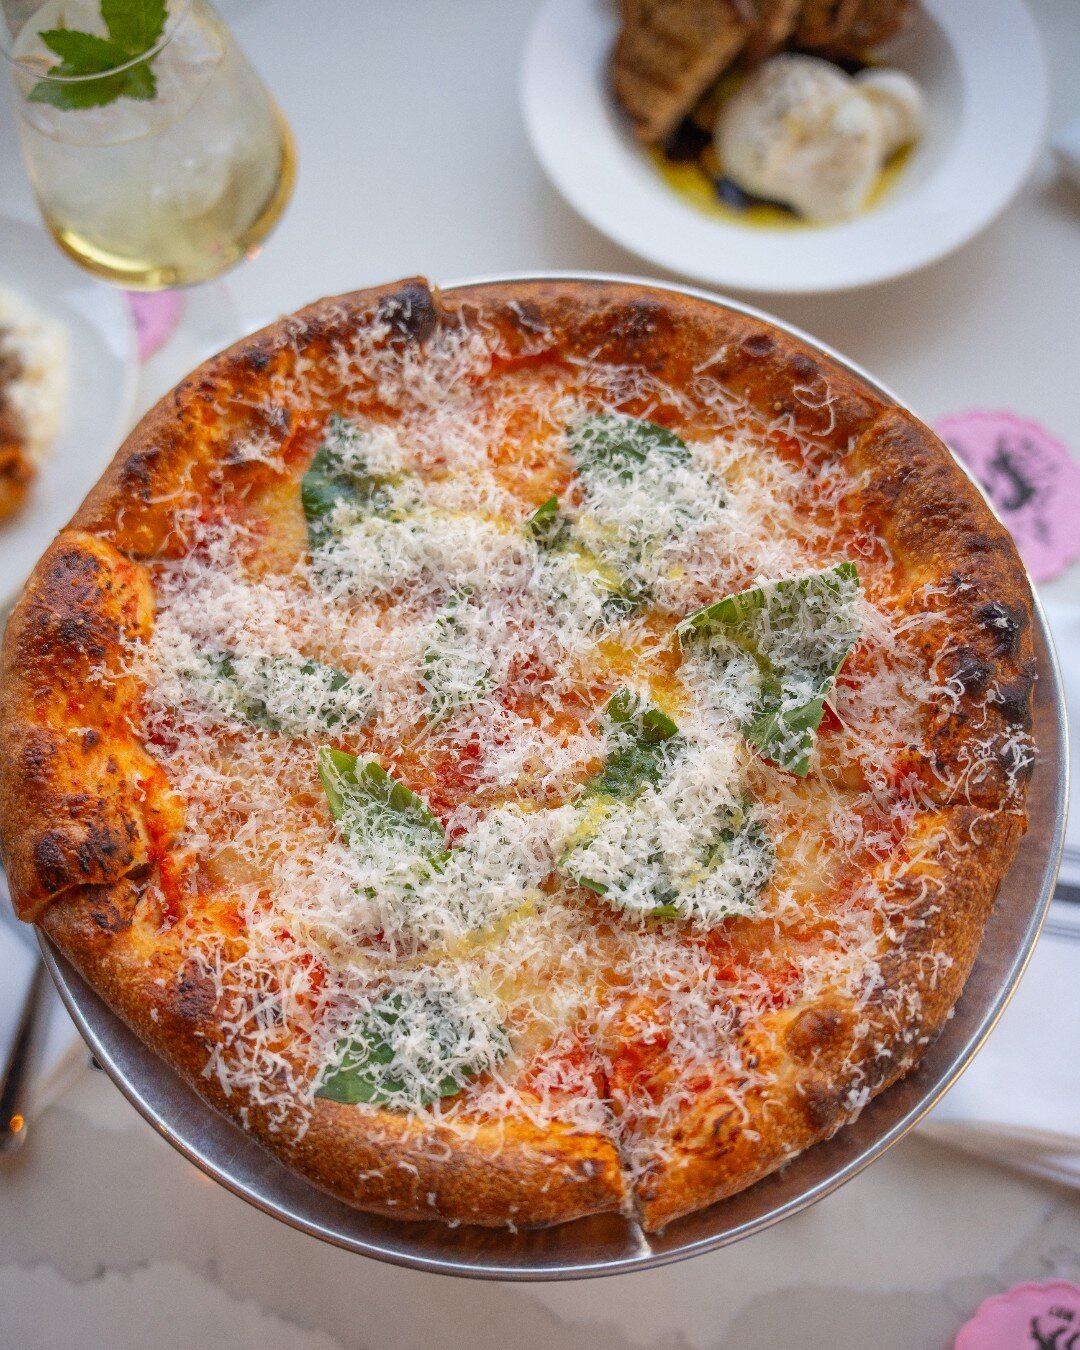 Find you someone who looks at you the way you are looking at this Margherita pizza.